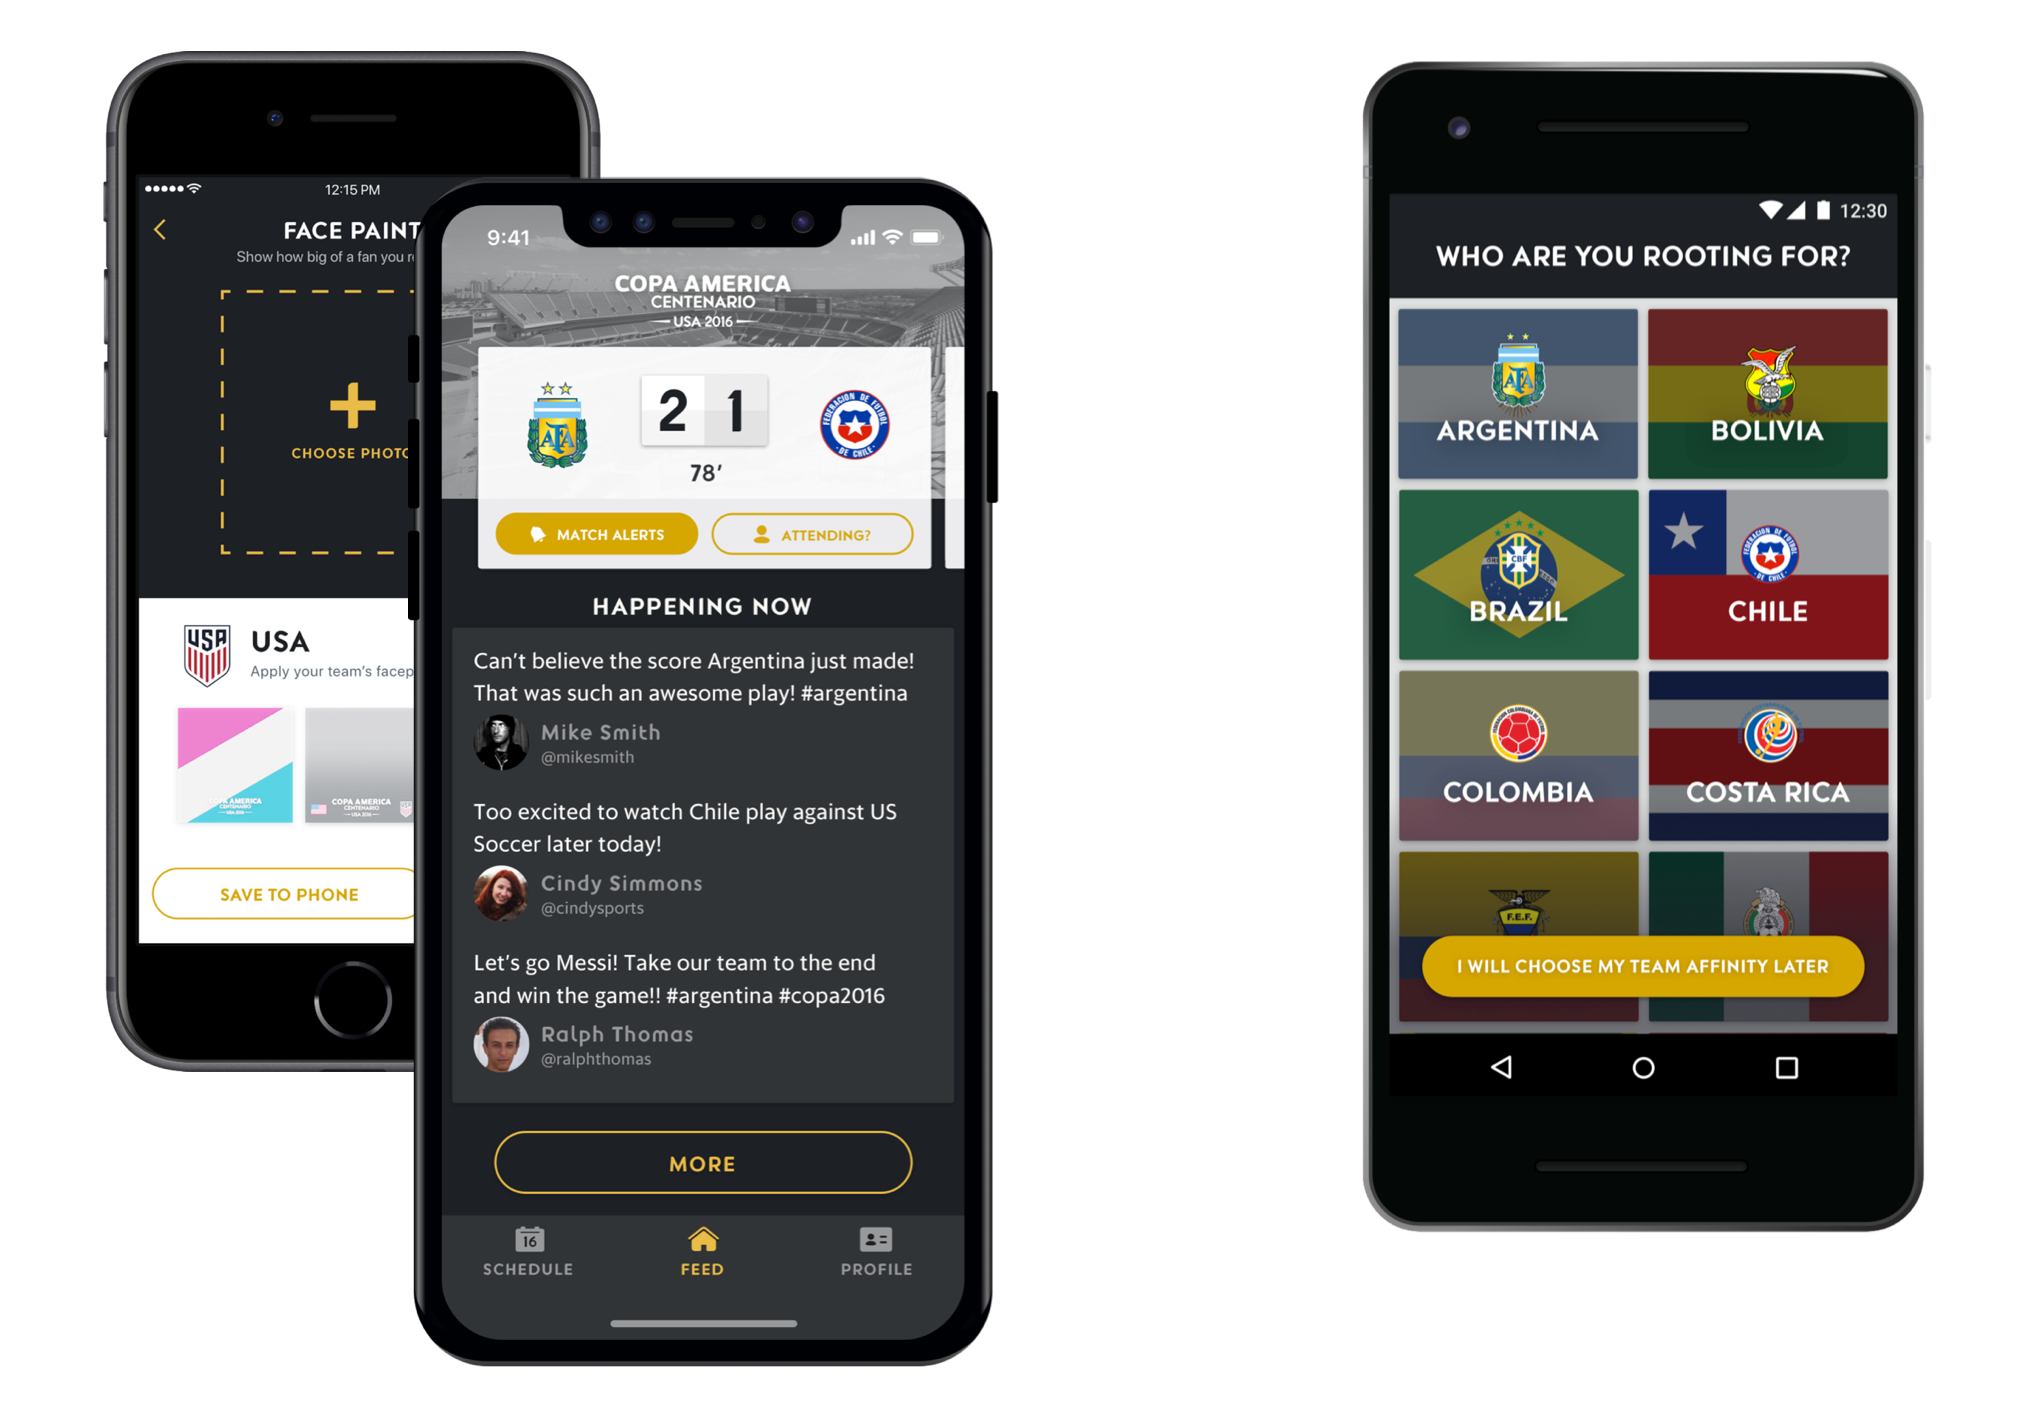 We designed and developed iOS and Android apps to serve more than a million international soccer fans.